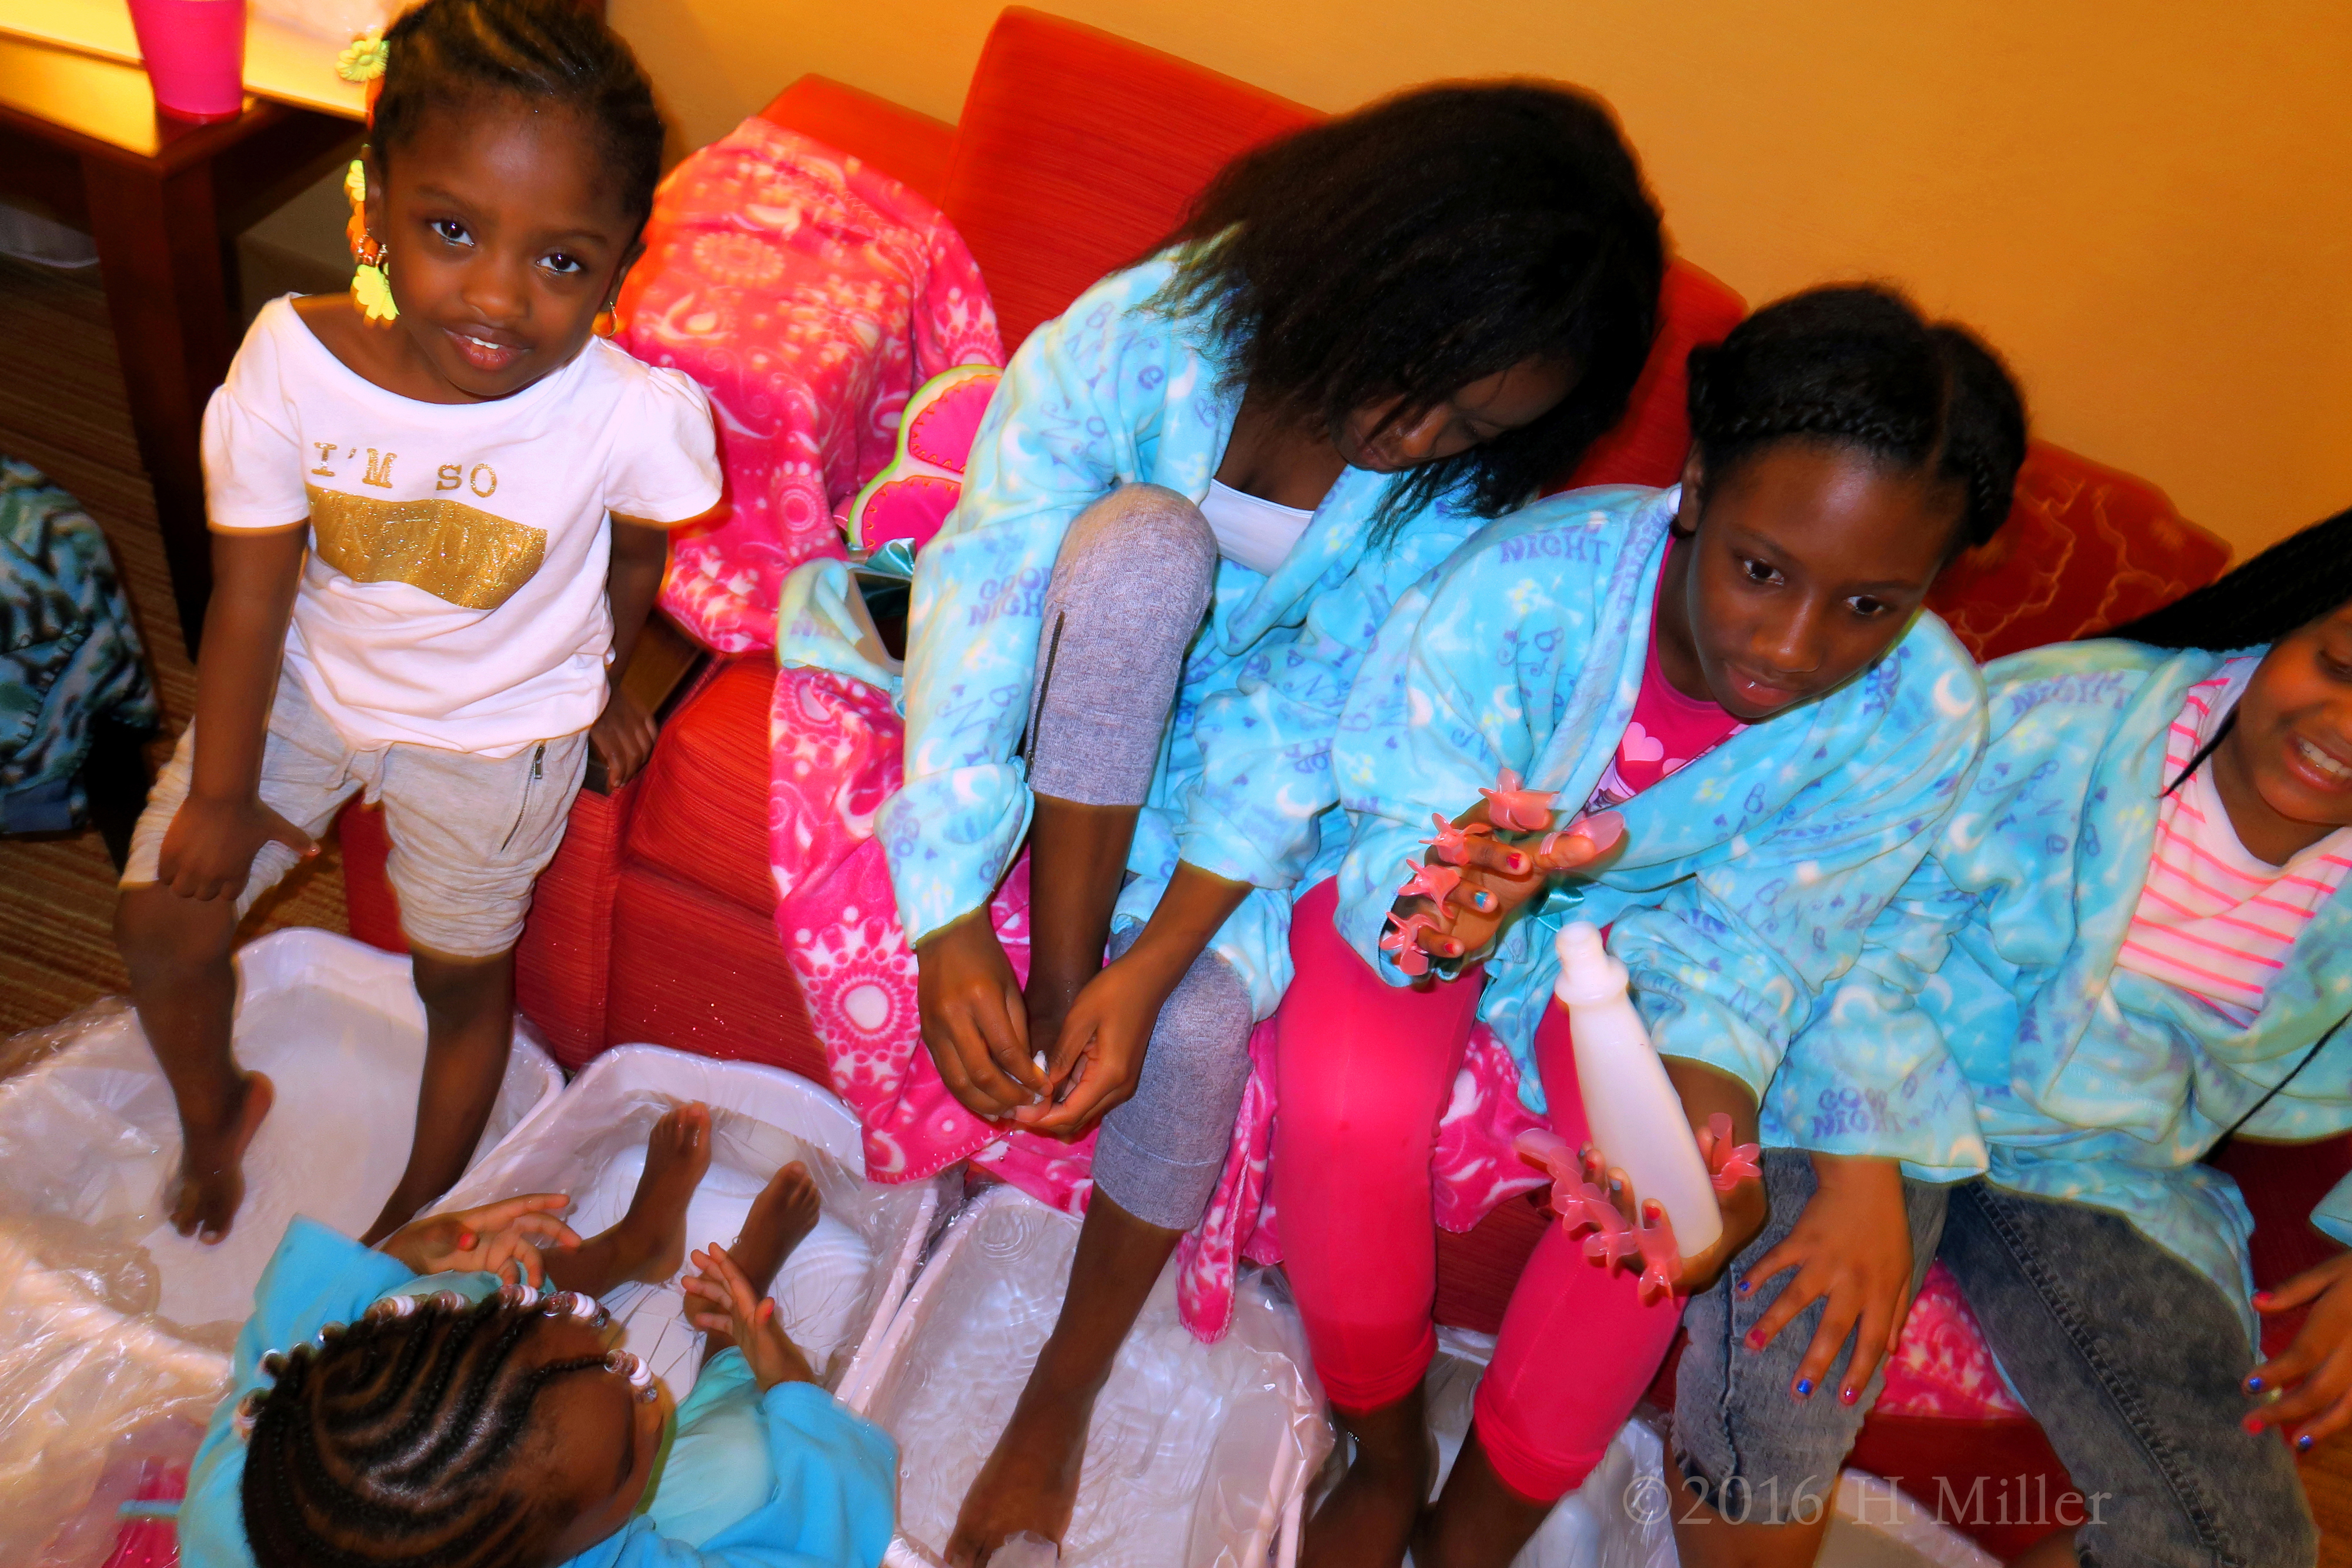 The Girls Participating In The Foot Soak Part Of The Mini Mani Activity. 